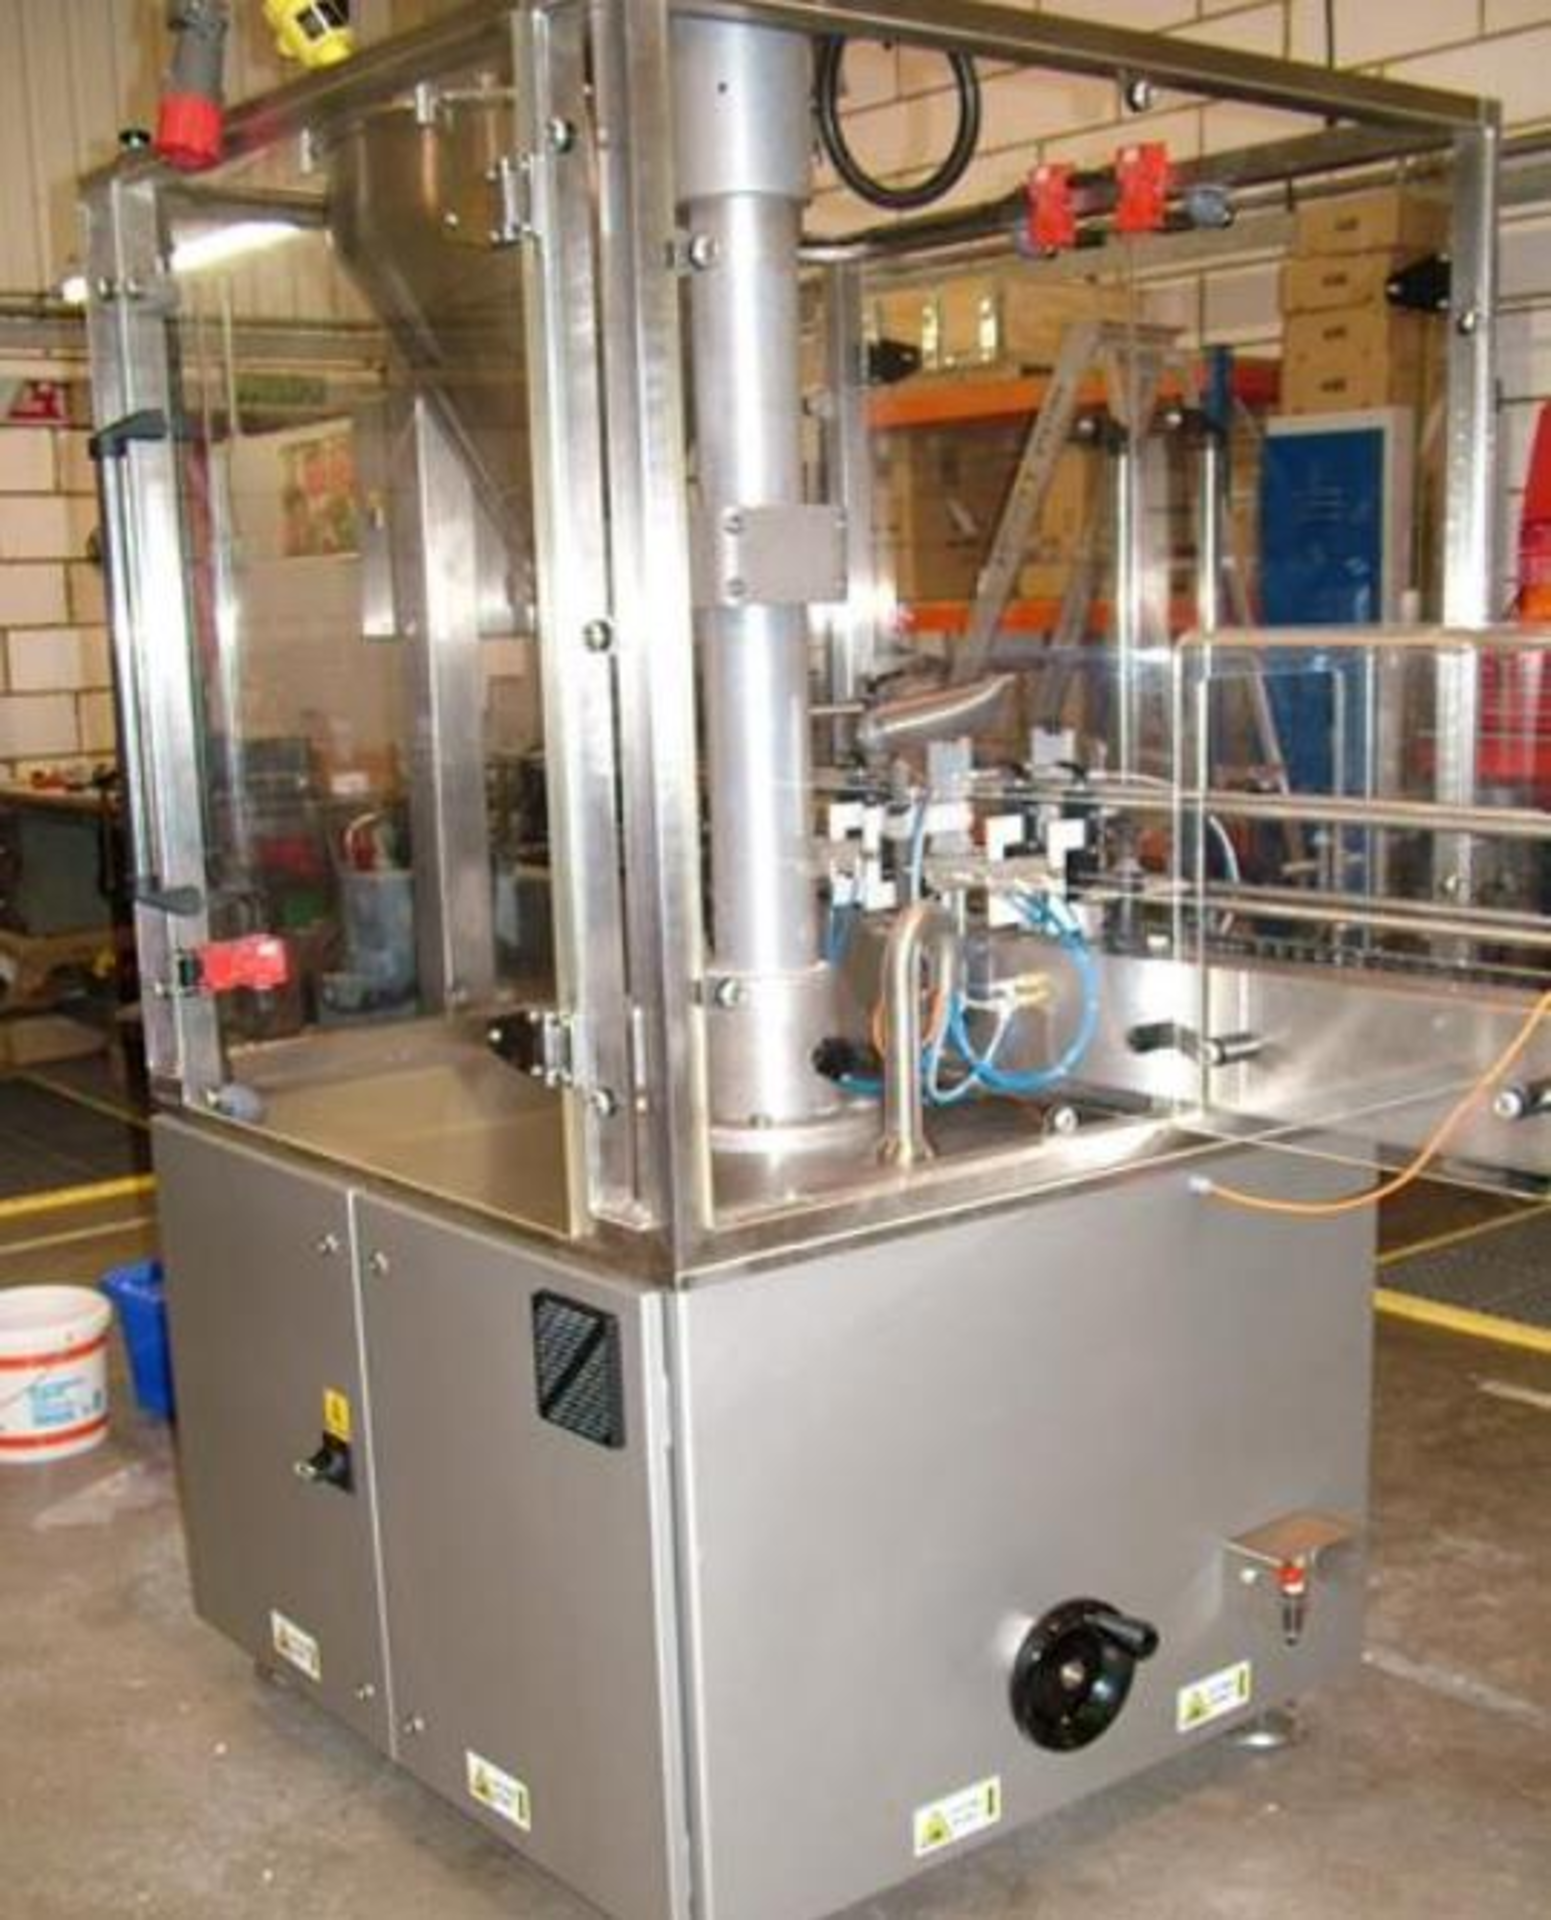 2 x ALLFILL POWDER FILLING LINES WITH MATCON DISCHARGERS - Image 2 of 9